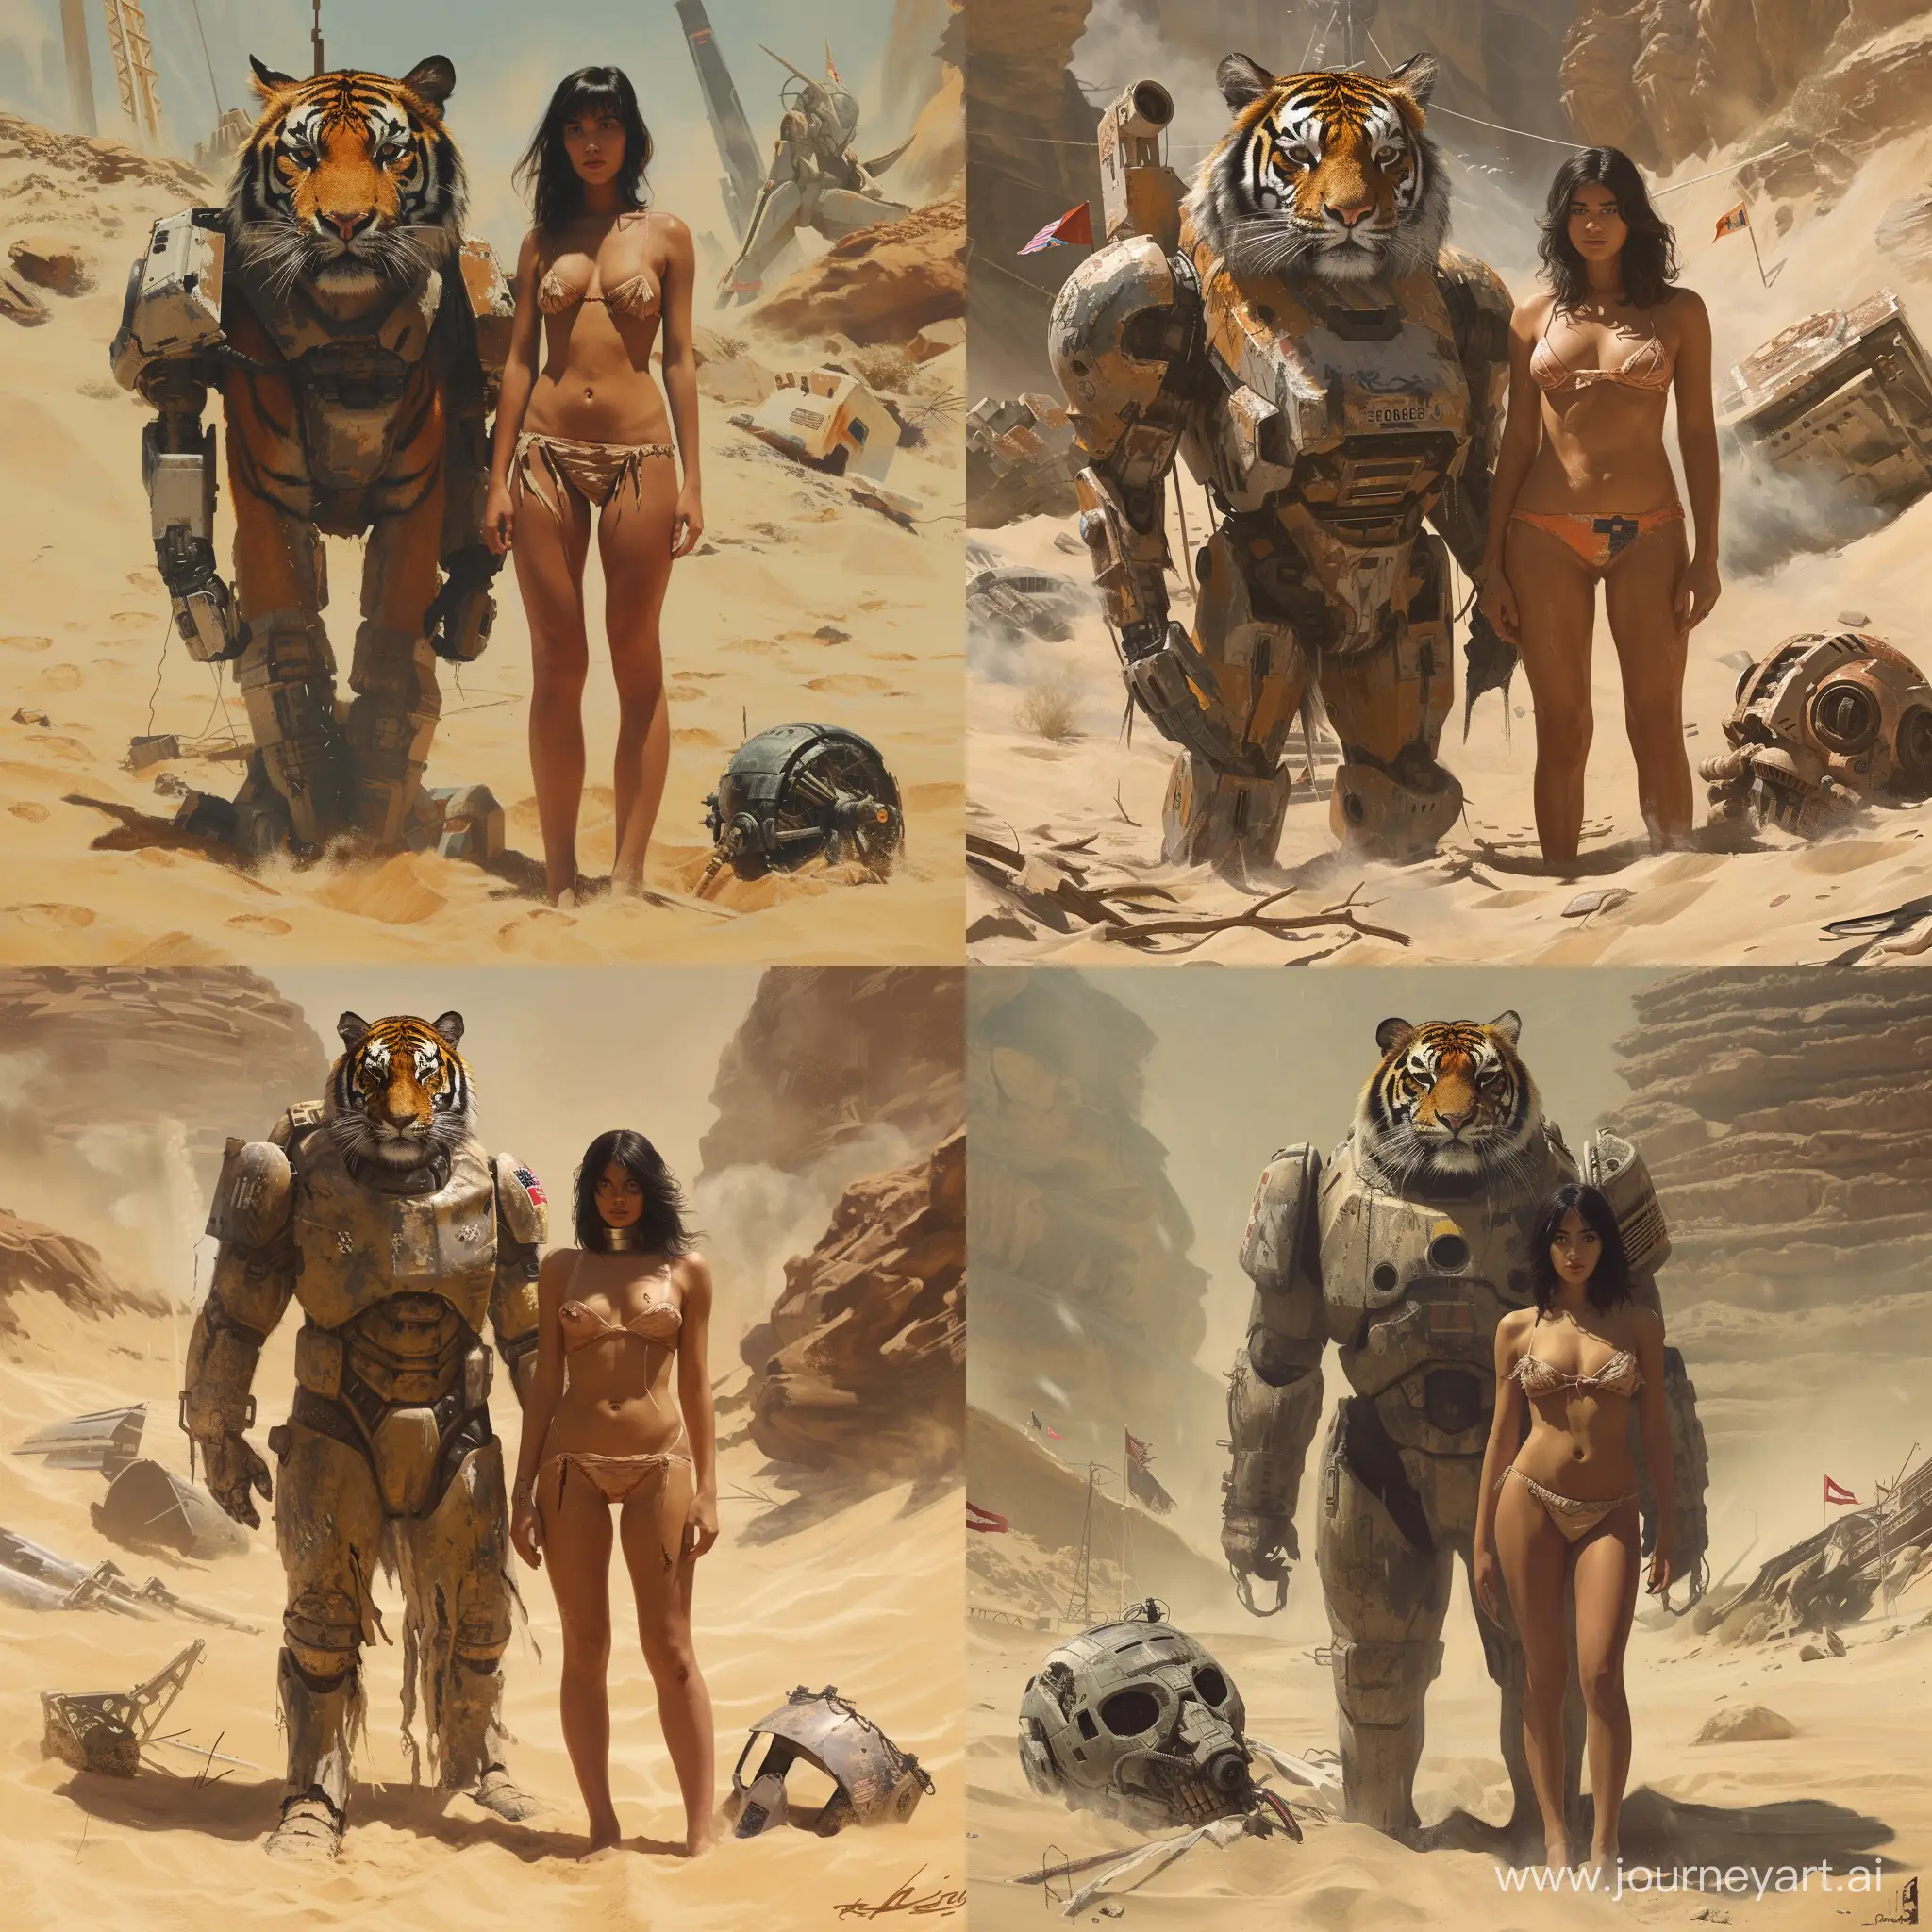 A post-apocalyptic desert landscape with a gigantic futuristic tiger wearing a weathered war suit standing beside a woman with dark hair. The woman's attire is a tattered bikini barely clinging to her body, with no flags or distinguishing nationality markers. They are surrounded by remnants of advanced civilization, with a massive robot head partially buried in the sand, hinting at a civilization long forgotten. The environment is hot and humid, with a temperature of 38 degrees Celsius and 100 percent humidity, causing a steamy, sweltering atmosphere. The scene is set in daytime, with the sun beating down on the stark and desolate scene, highlighting the contrast between the raw power of the tiger and the delicate form of the woman. This is a single image, combining elements of survival, desolation, and the bond between human and beast in a world that has moved beyond its former technological glory.